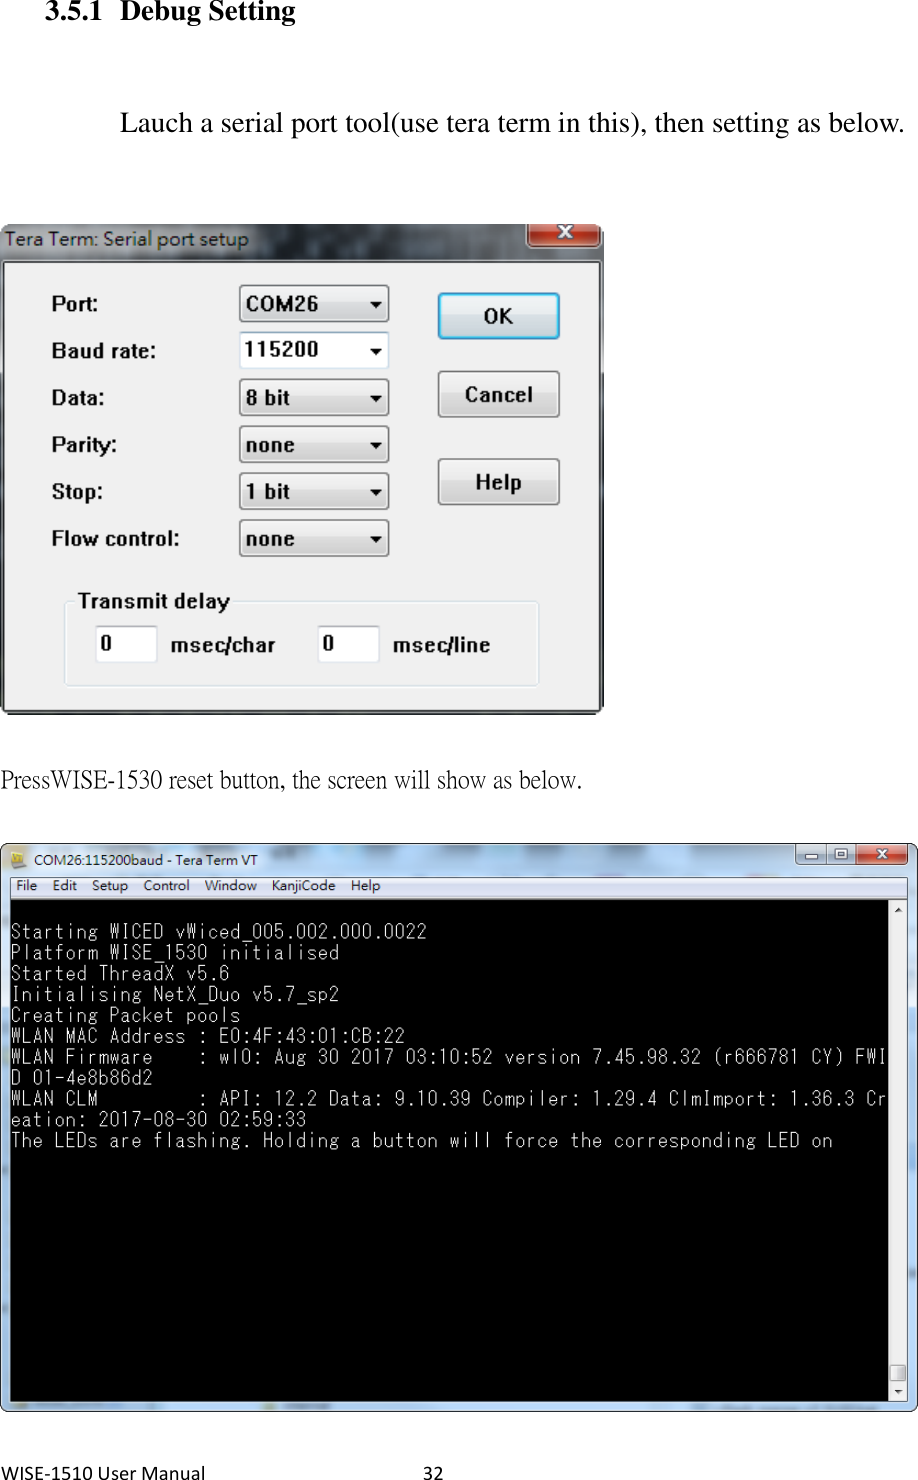 WISE-1510 User Manual  32 3.5.1 Debug Setting Lauch a serial port tool(use tera term in this), then setting as below.    Press WISE-1530 reset button, the screen will show as below.    